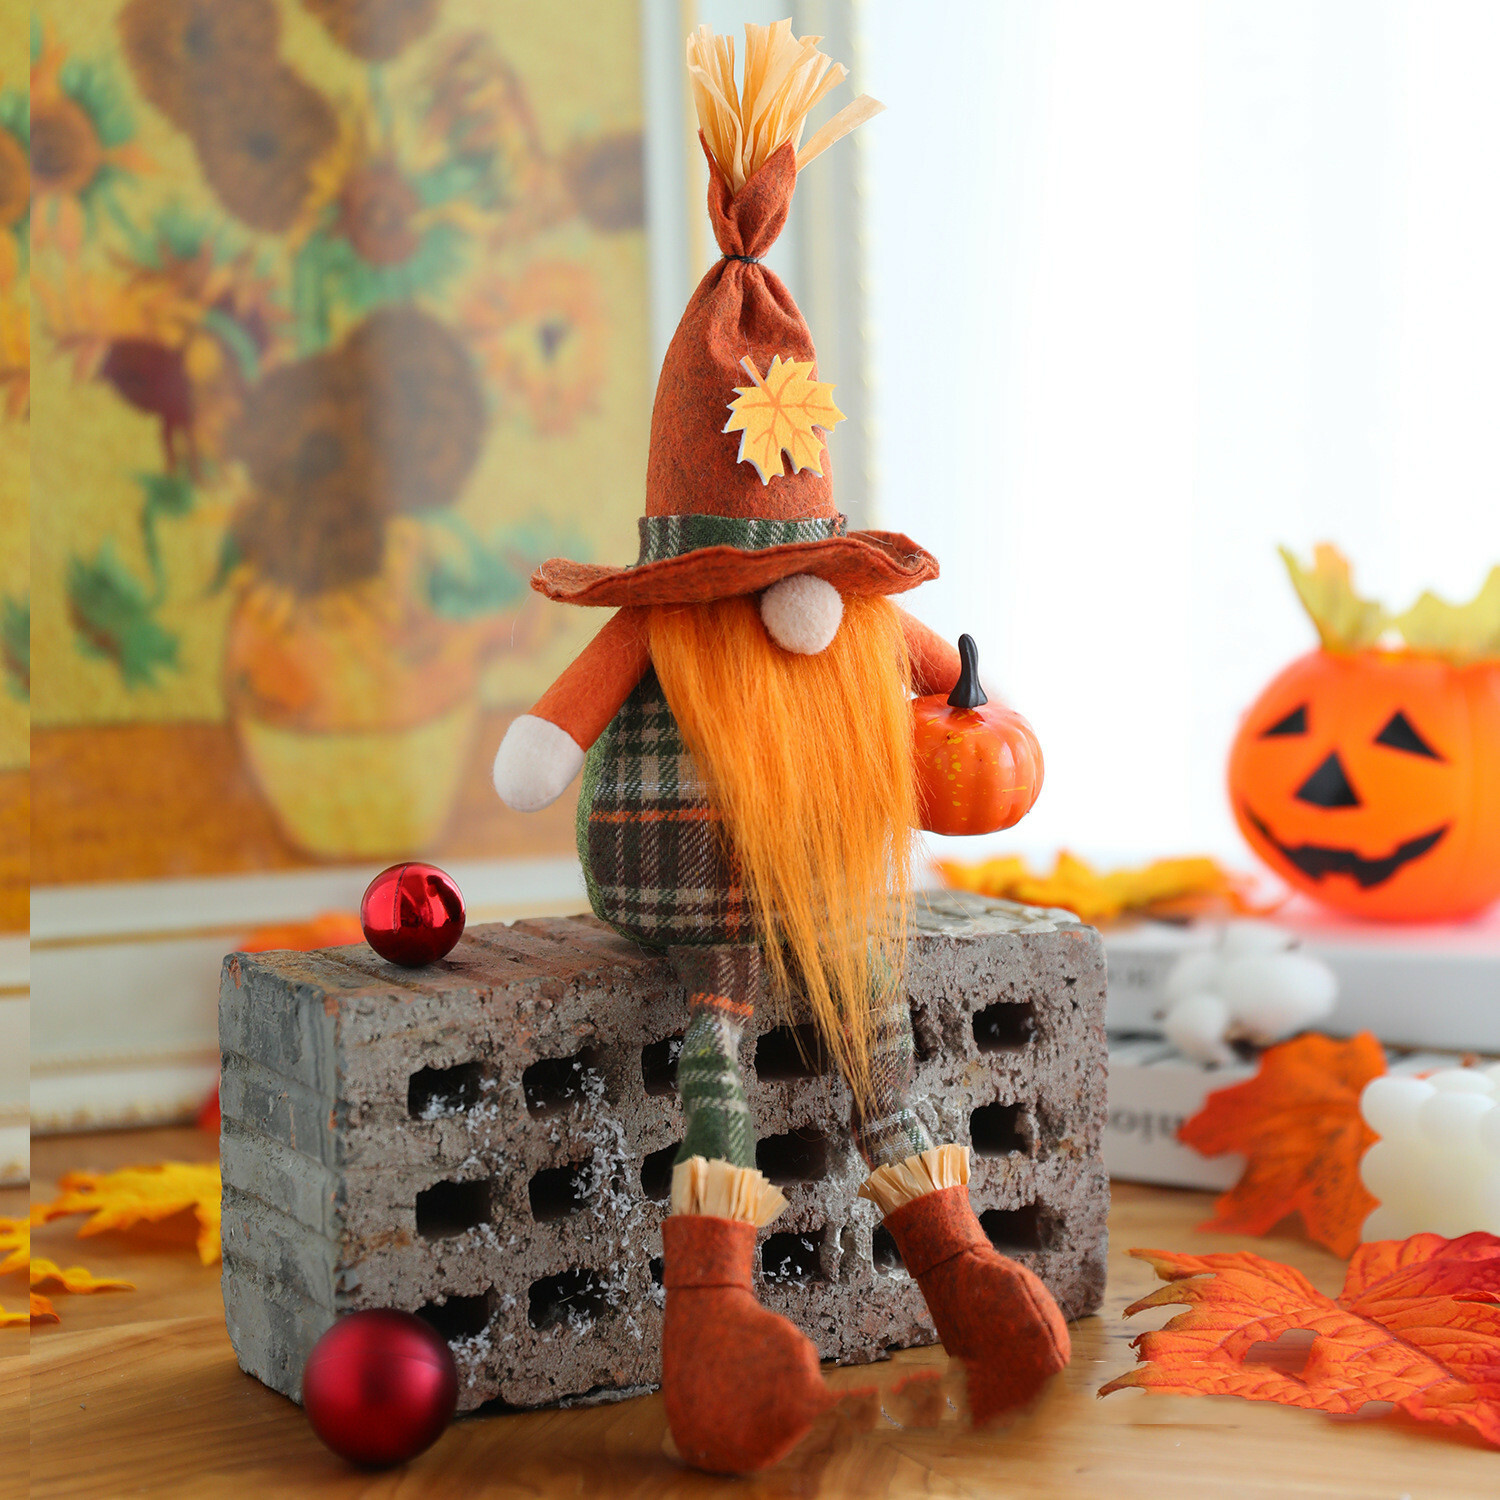 Event Plushies Charming Pumpkin Broom Witch Doll - Perfect for Harvest Festival Decor